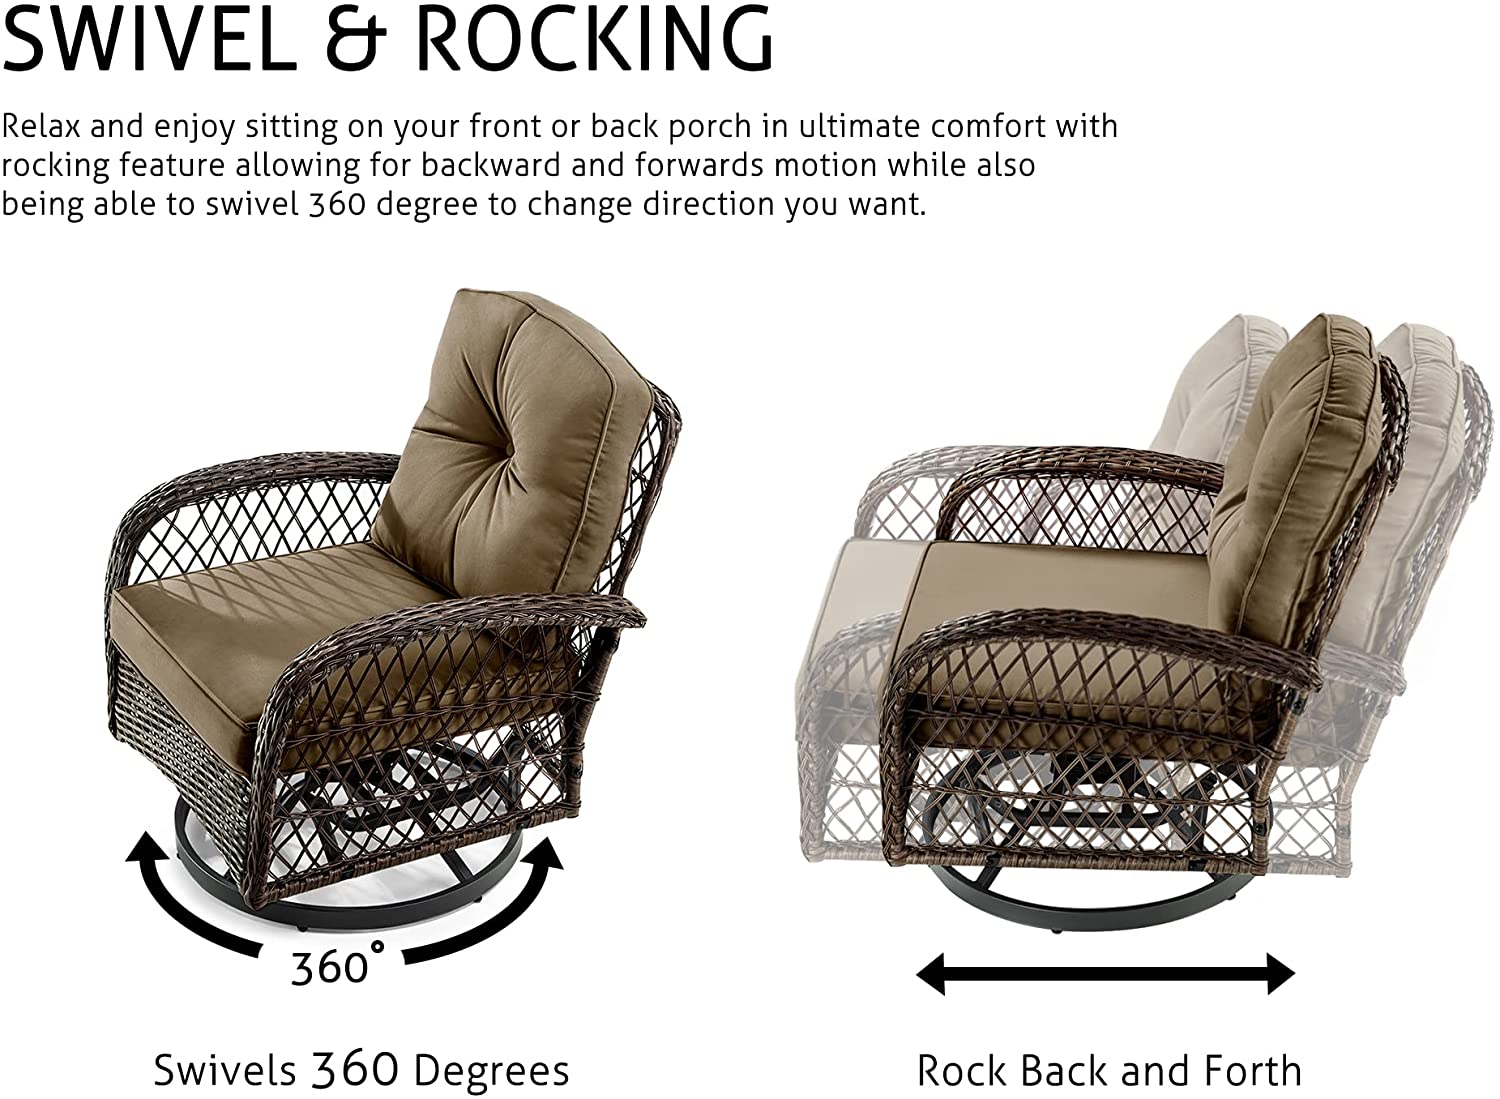 Amolife 3 Pieces Wicker Patio Furniture Set, Bistro Set with Outdoor Swivel Rocking Chair and Coffee Table, Khaki - image 4 of 9